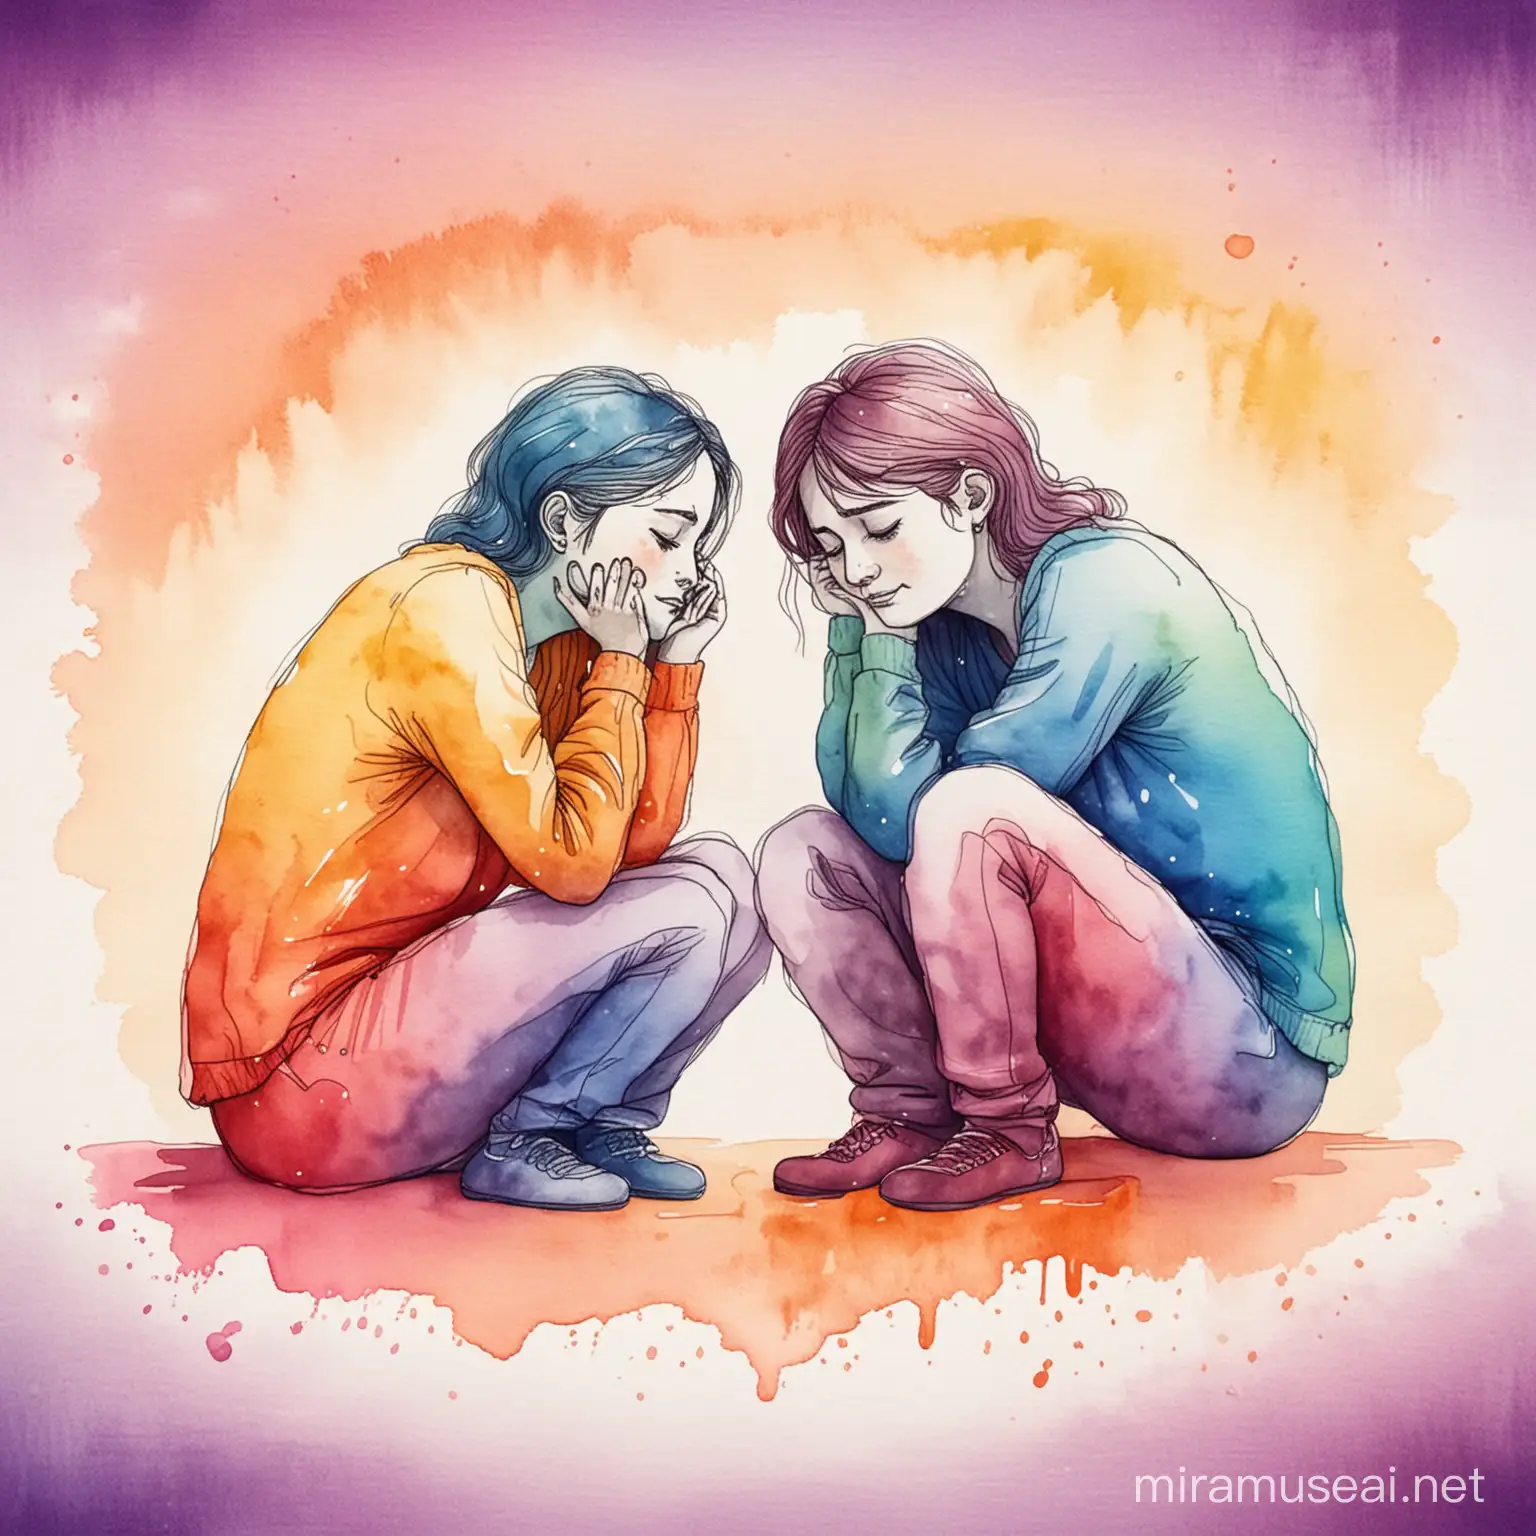 Style: Hand-drawn Visual Thinking Styles
Form: Gradient Watercolor
Content: Two figures sit facing each other, one is crying and the other is comforting.
Background: bright colors